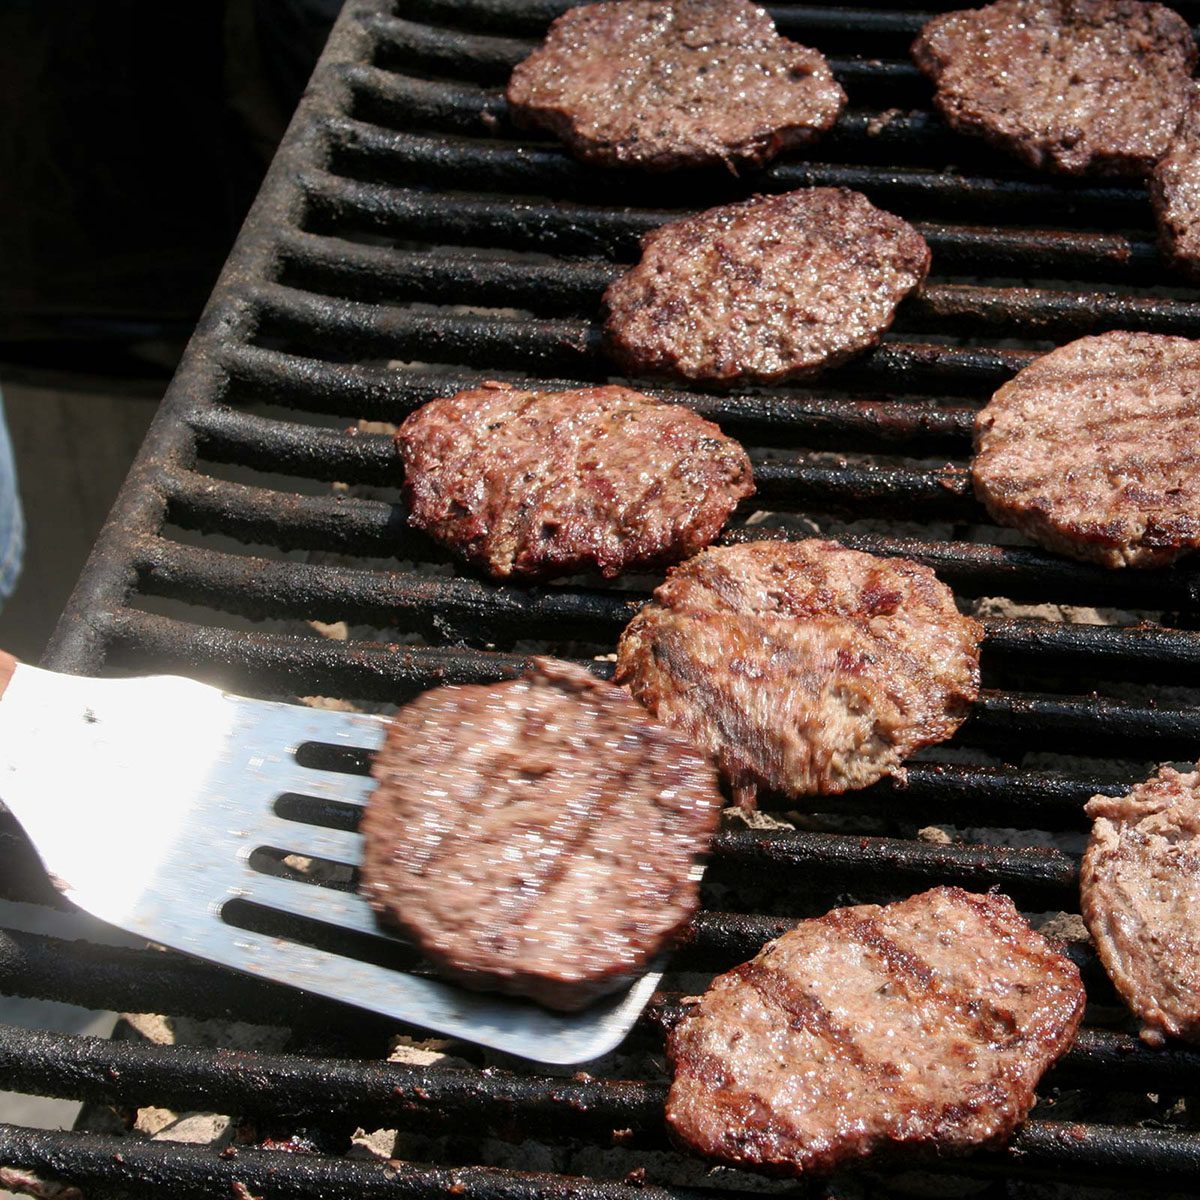 Flipping burgers on a grill